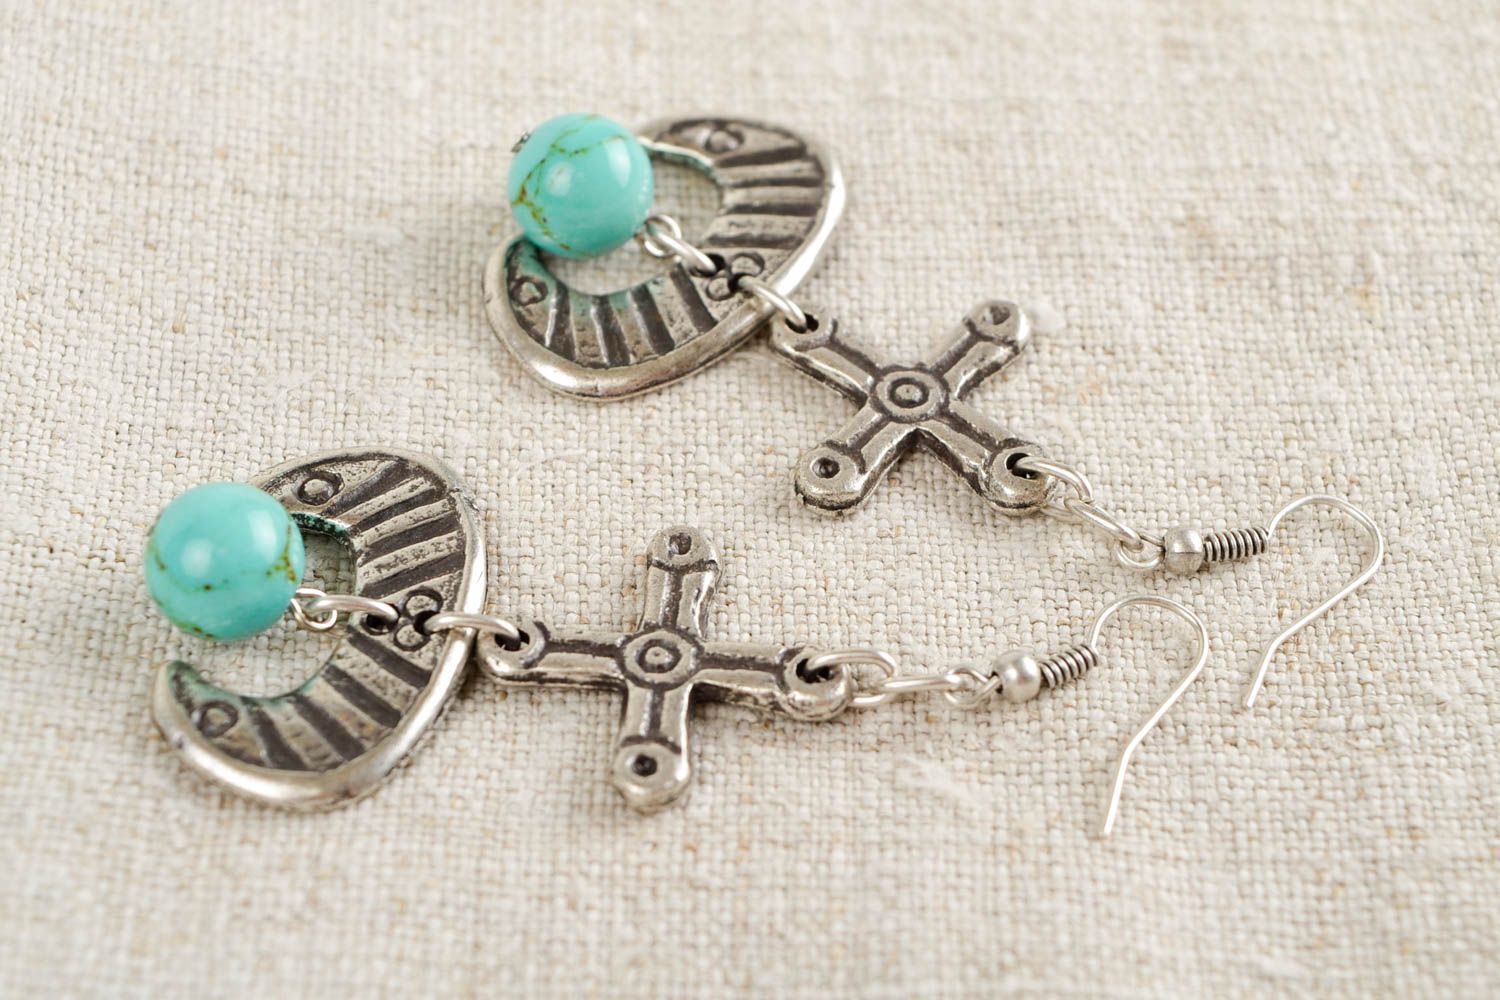 Long handcrafted earrings designer turquoise metal accessories women gift idea photo 1